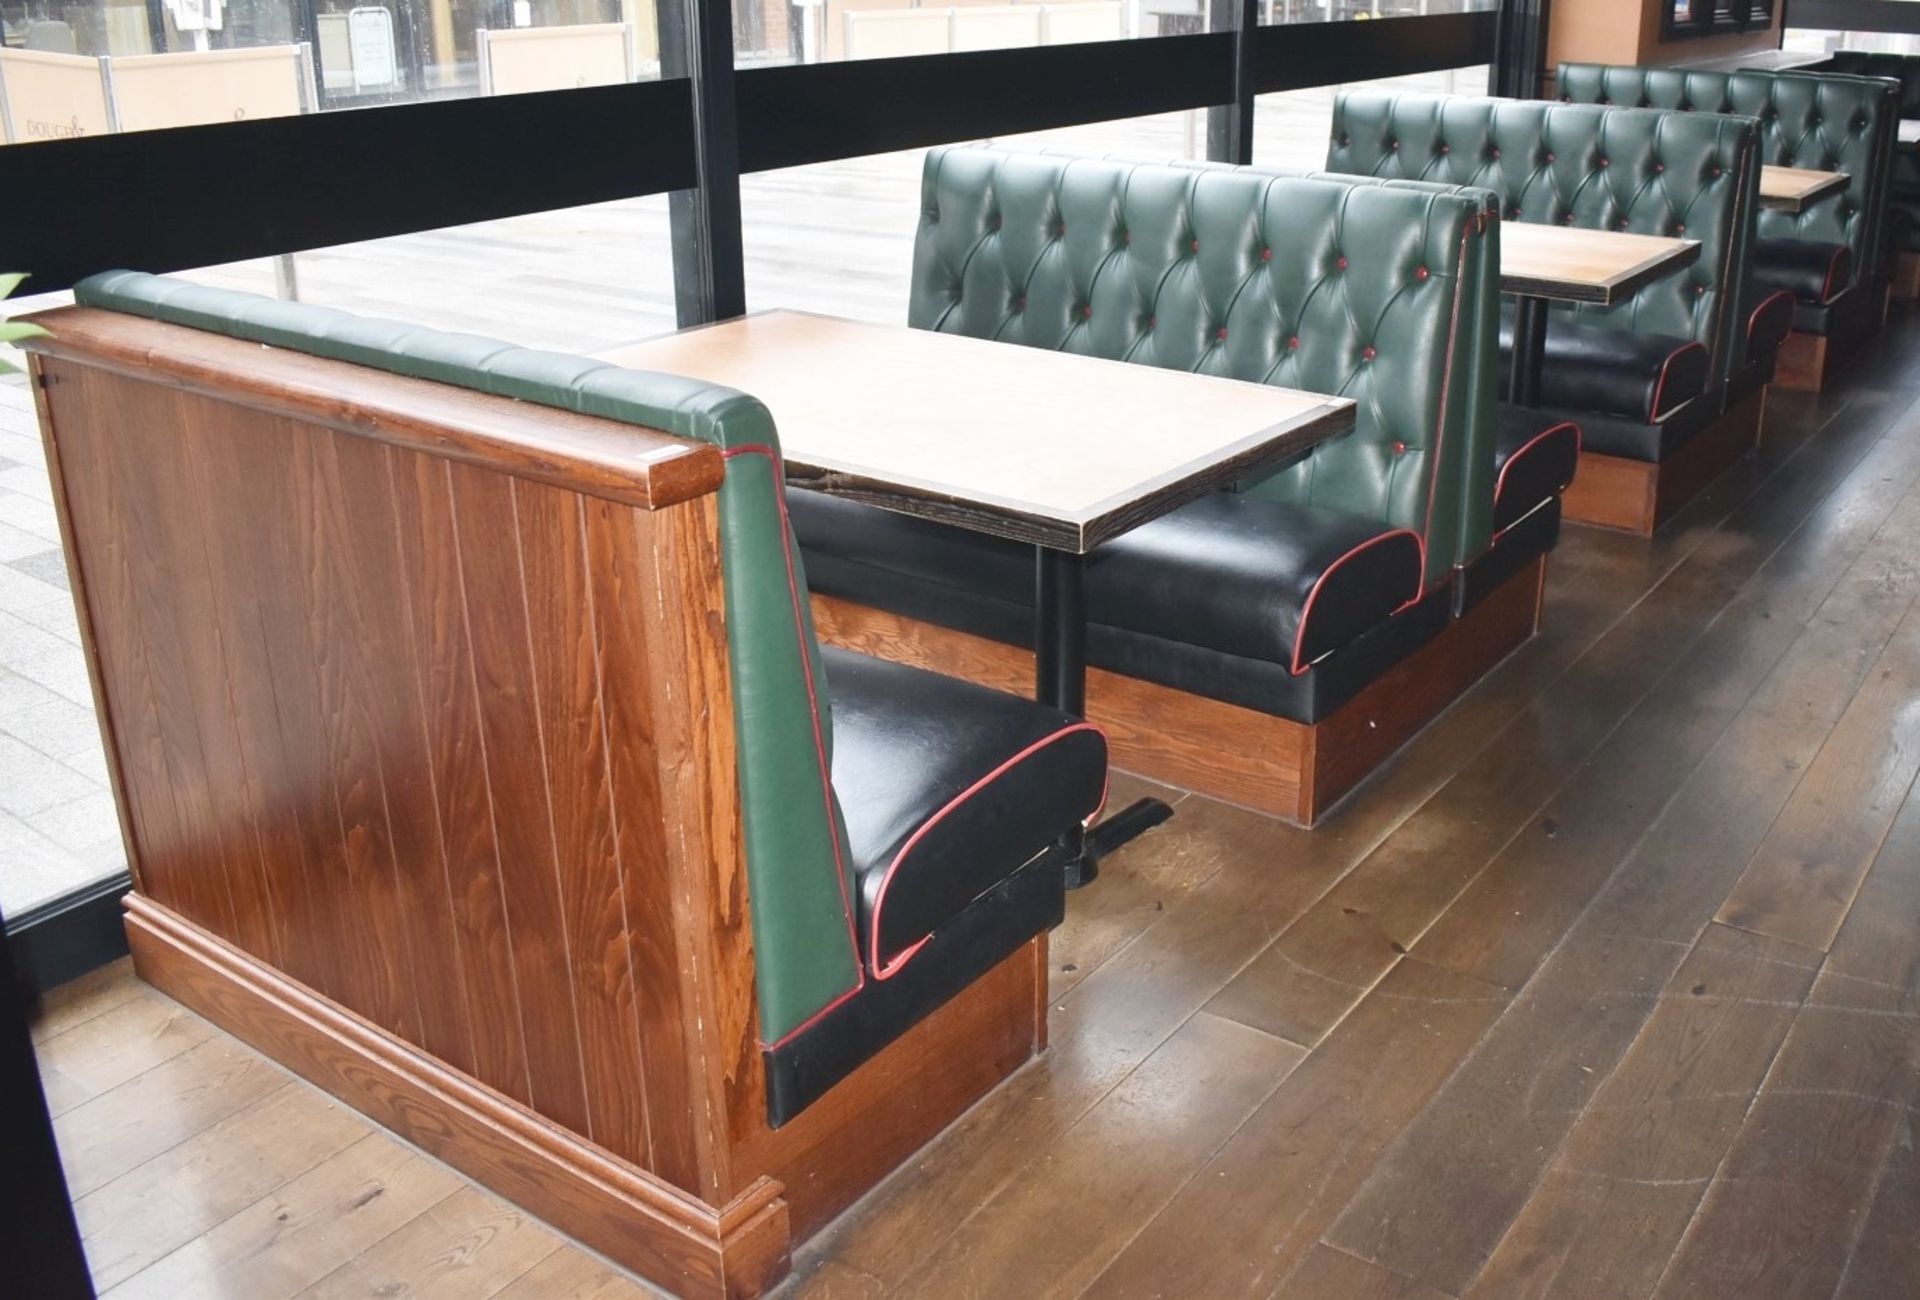 4 x Sections of Restaurant Double Booth Seating - Sits Up to 12 Persons - Green & Black Upholstery - Image 21 of 24